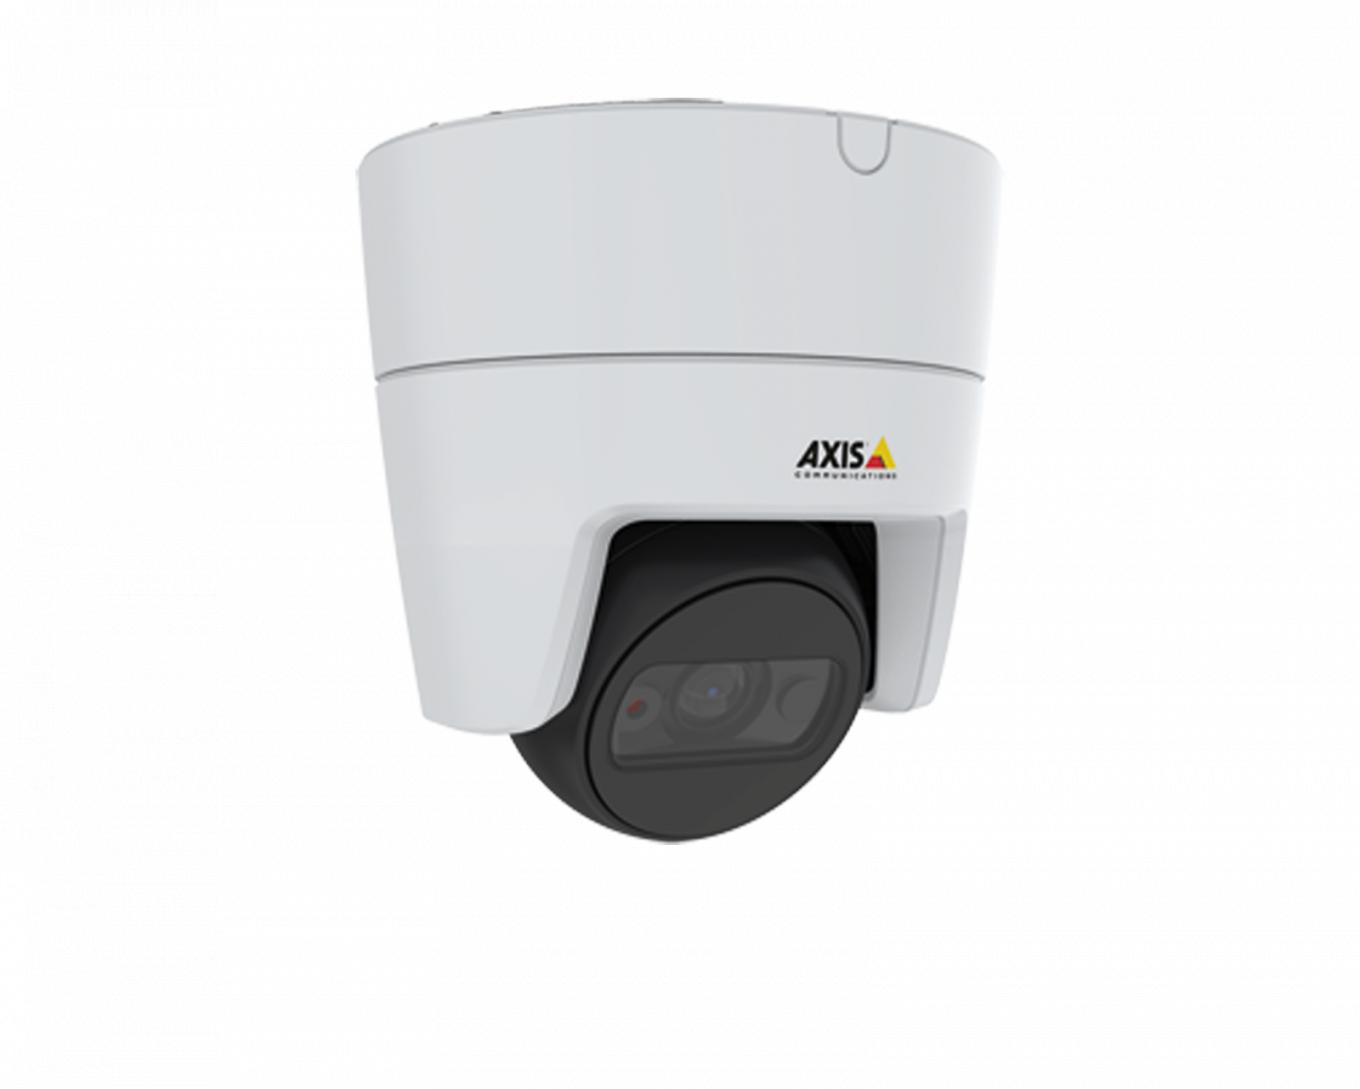 AXIS M3116 LVE mounted in ceiling from right angle